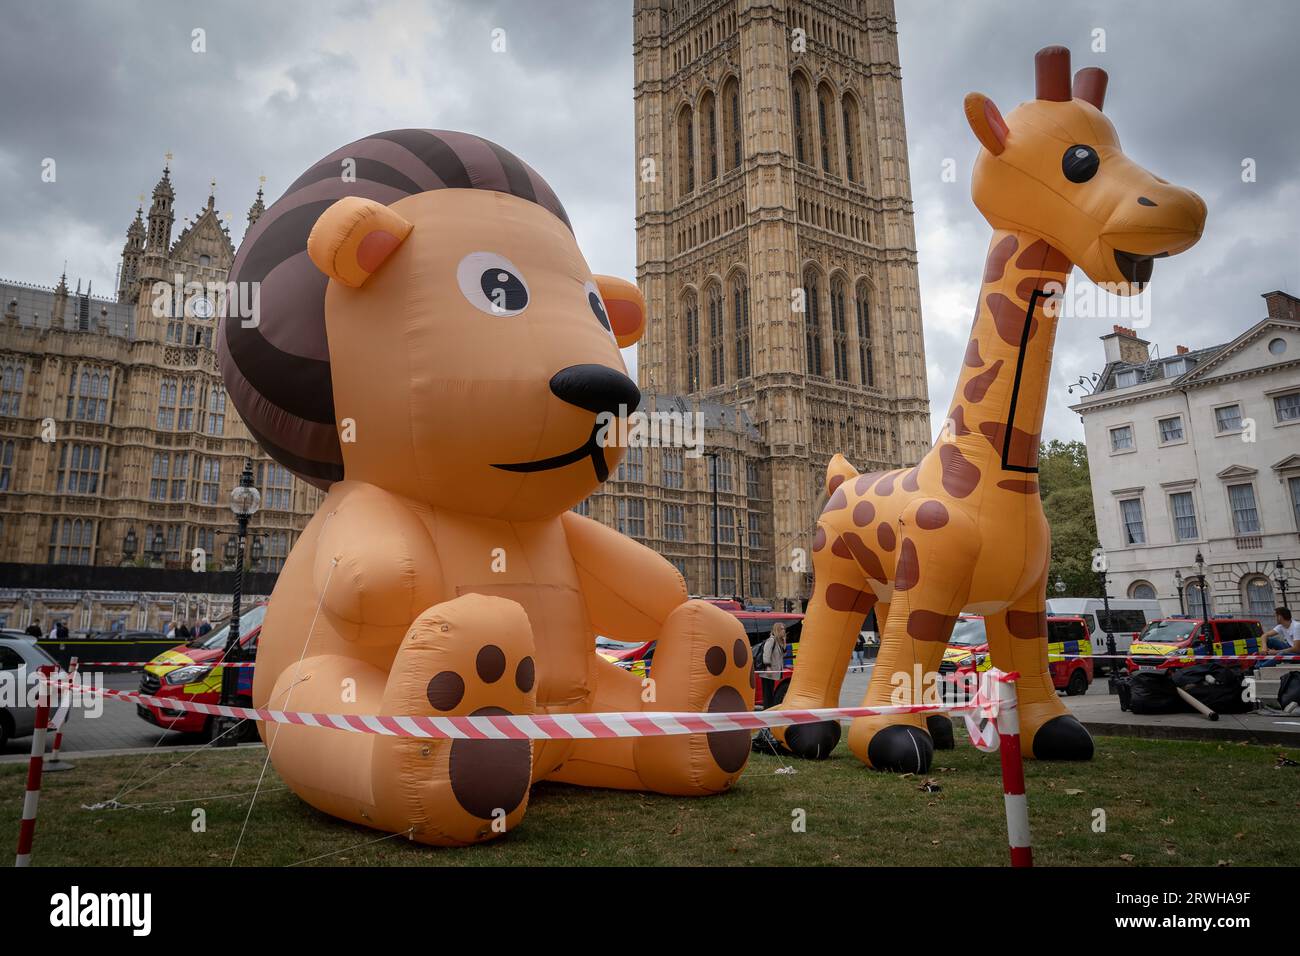 Ban Hunting Trophy importiert Bill Protest in Old Palace Yard, Westminster, London, Großbritannien Stockfoto